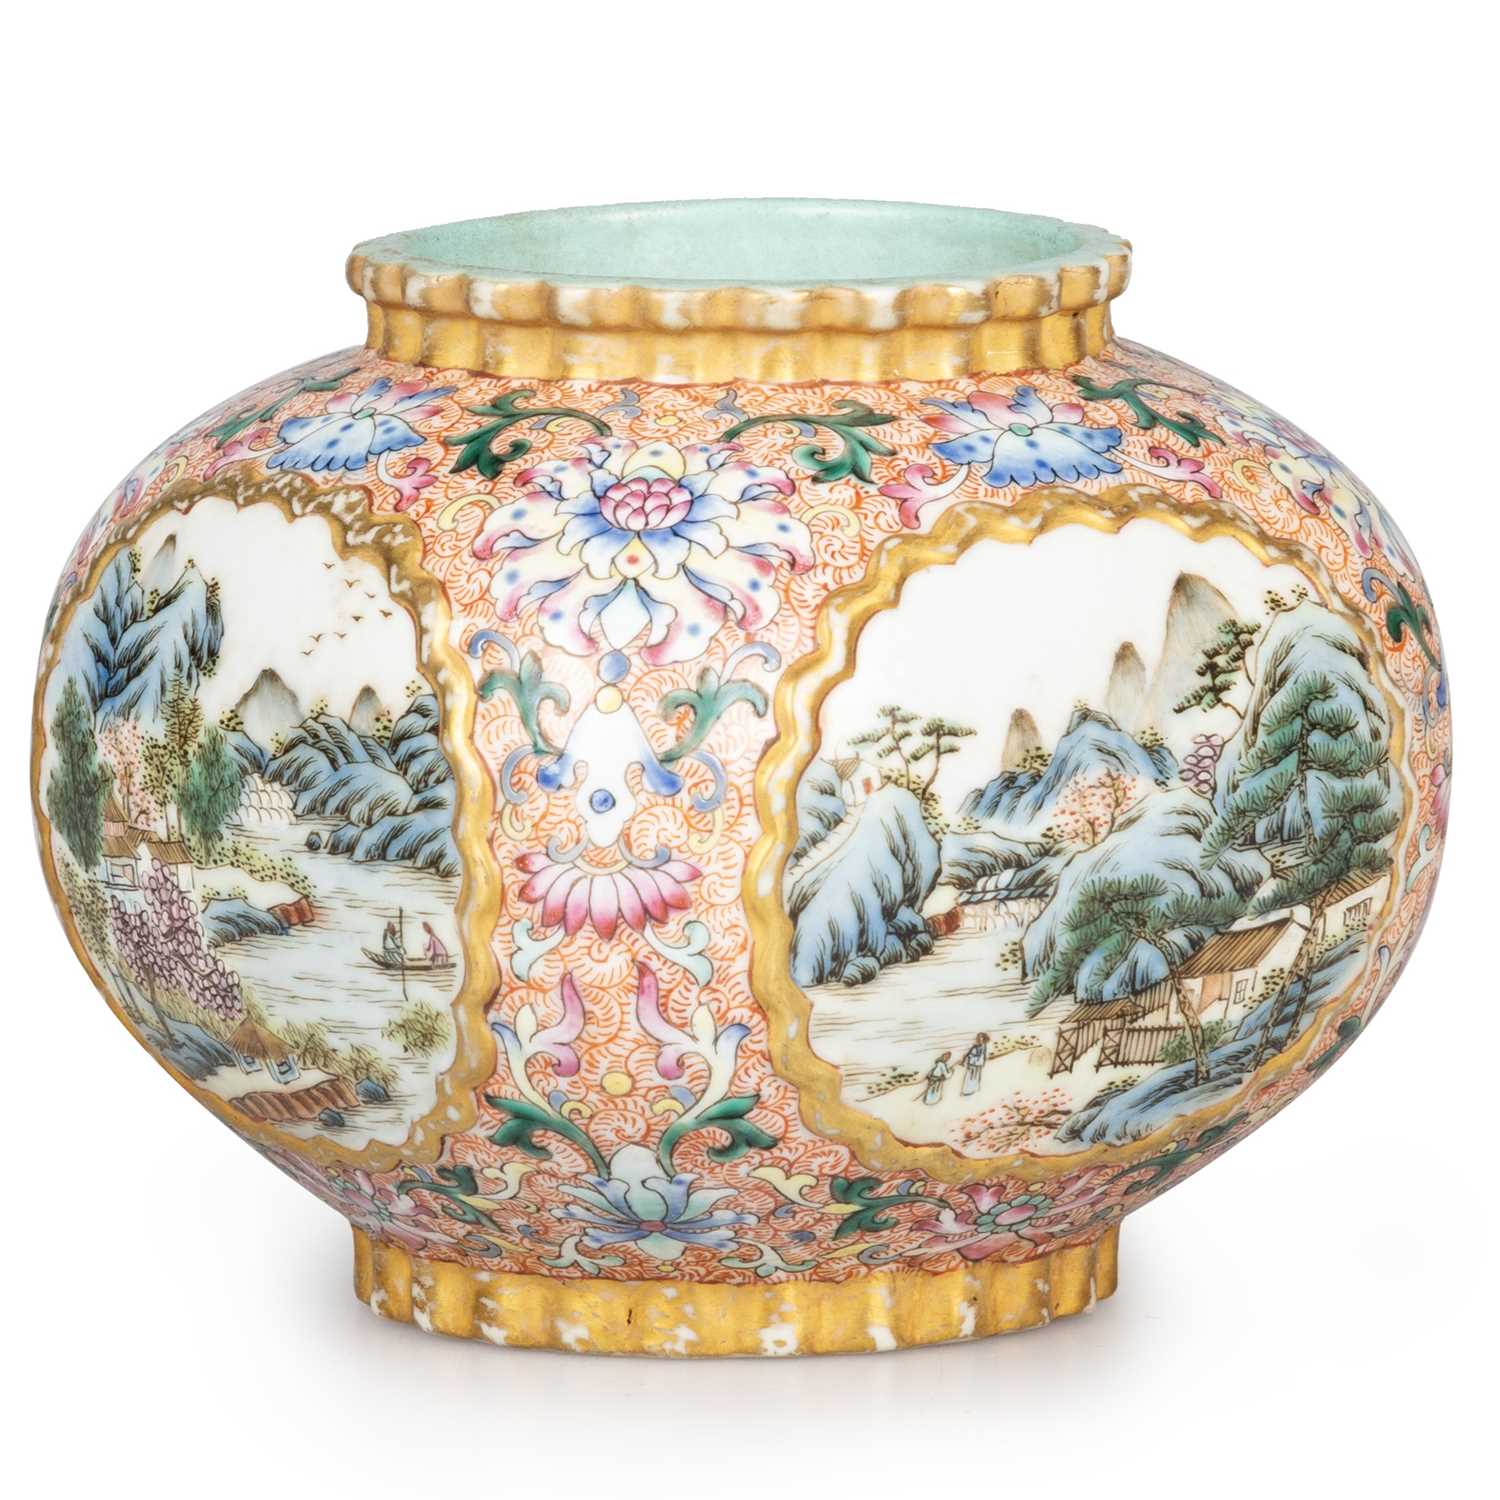 A CHINESE FAMILLE ROSE VASE, 19TH CENTURY